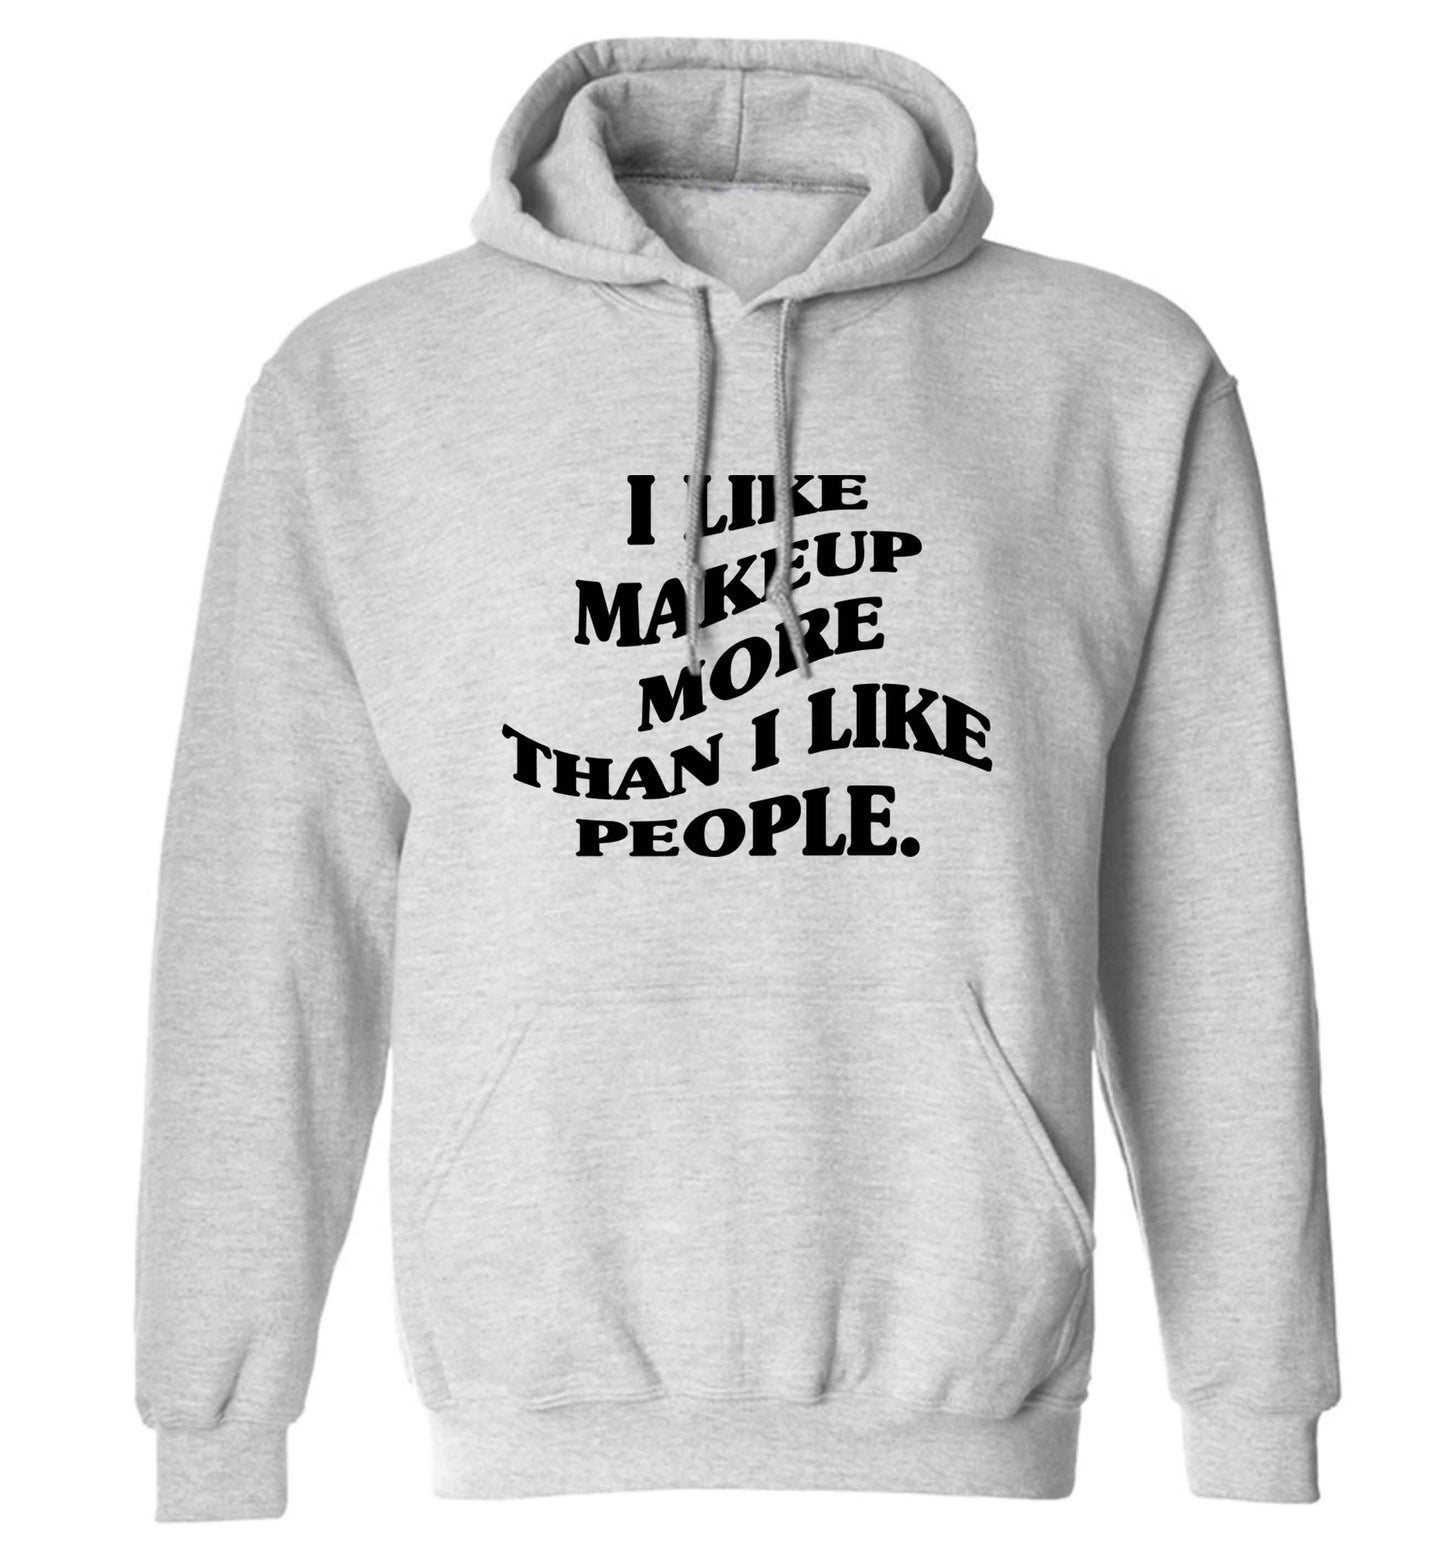 I like makeup more than people adults unisex grey hoodie 2XL